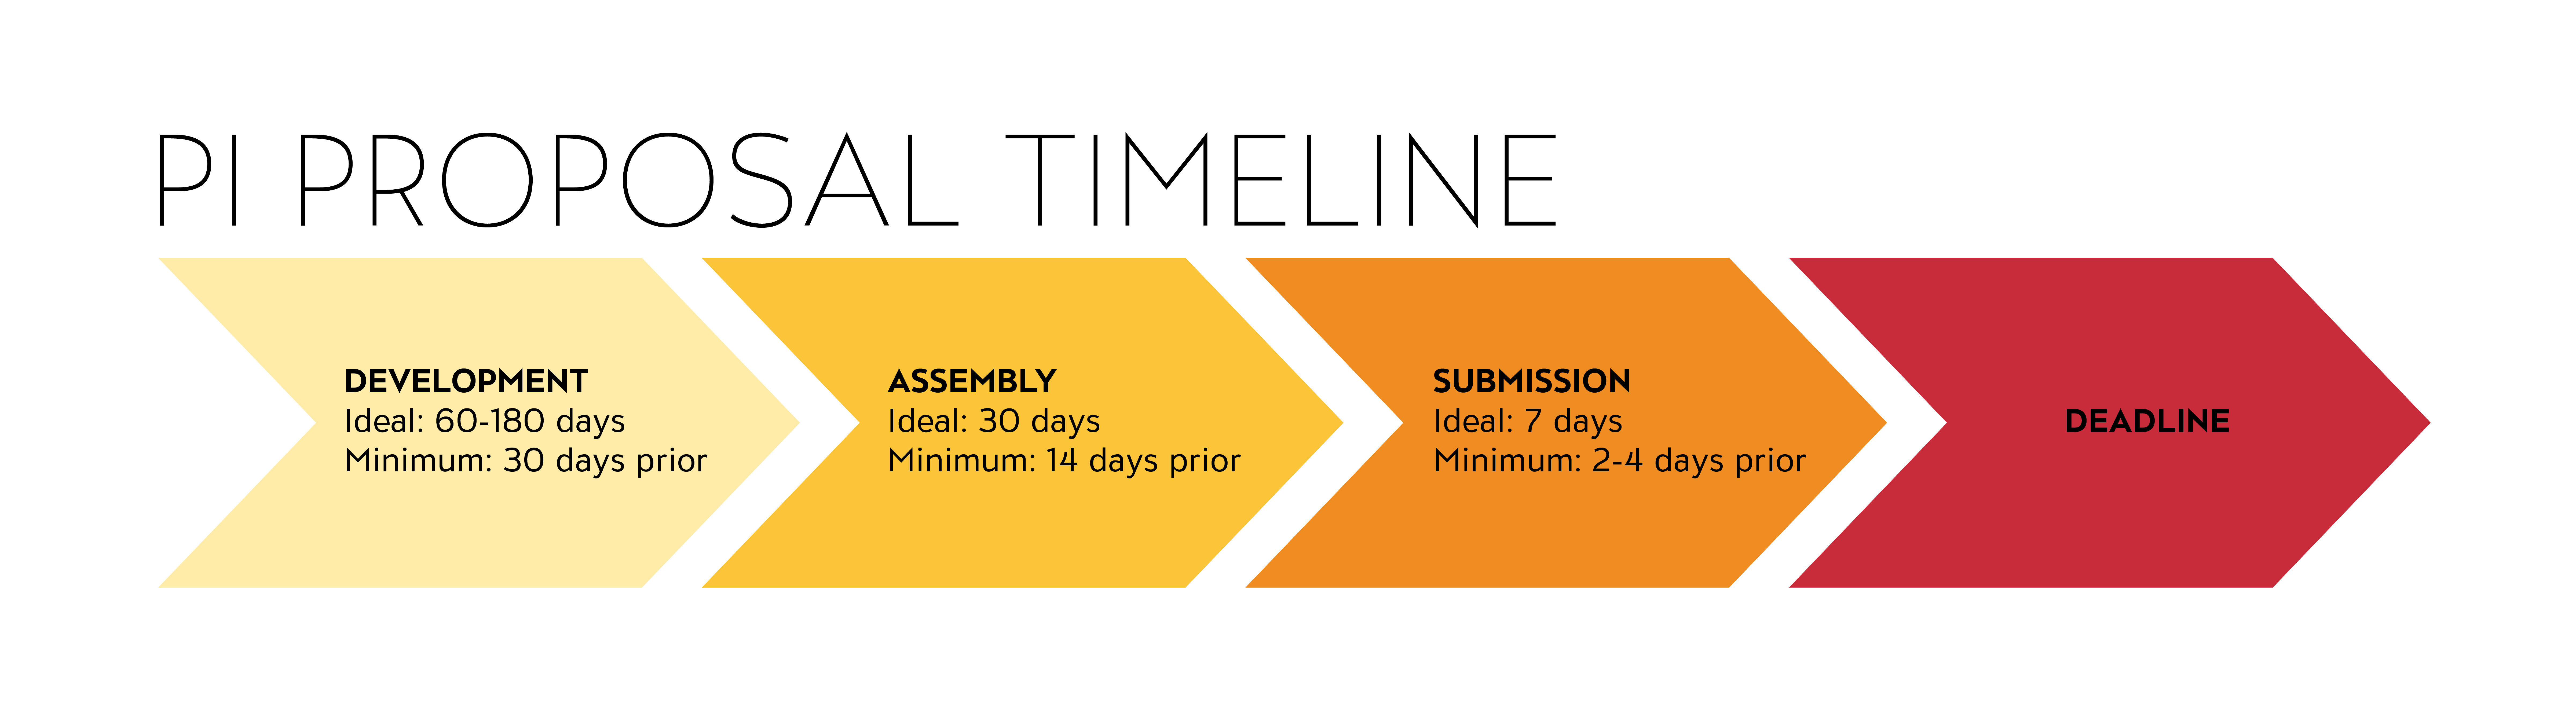 sample research timeline for proposal